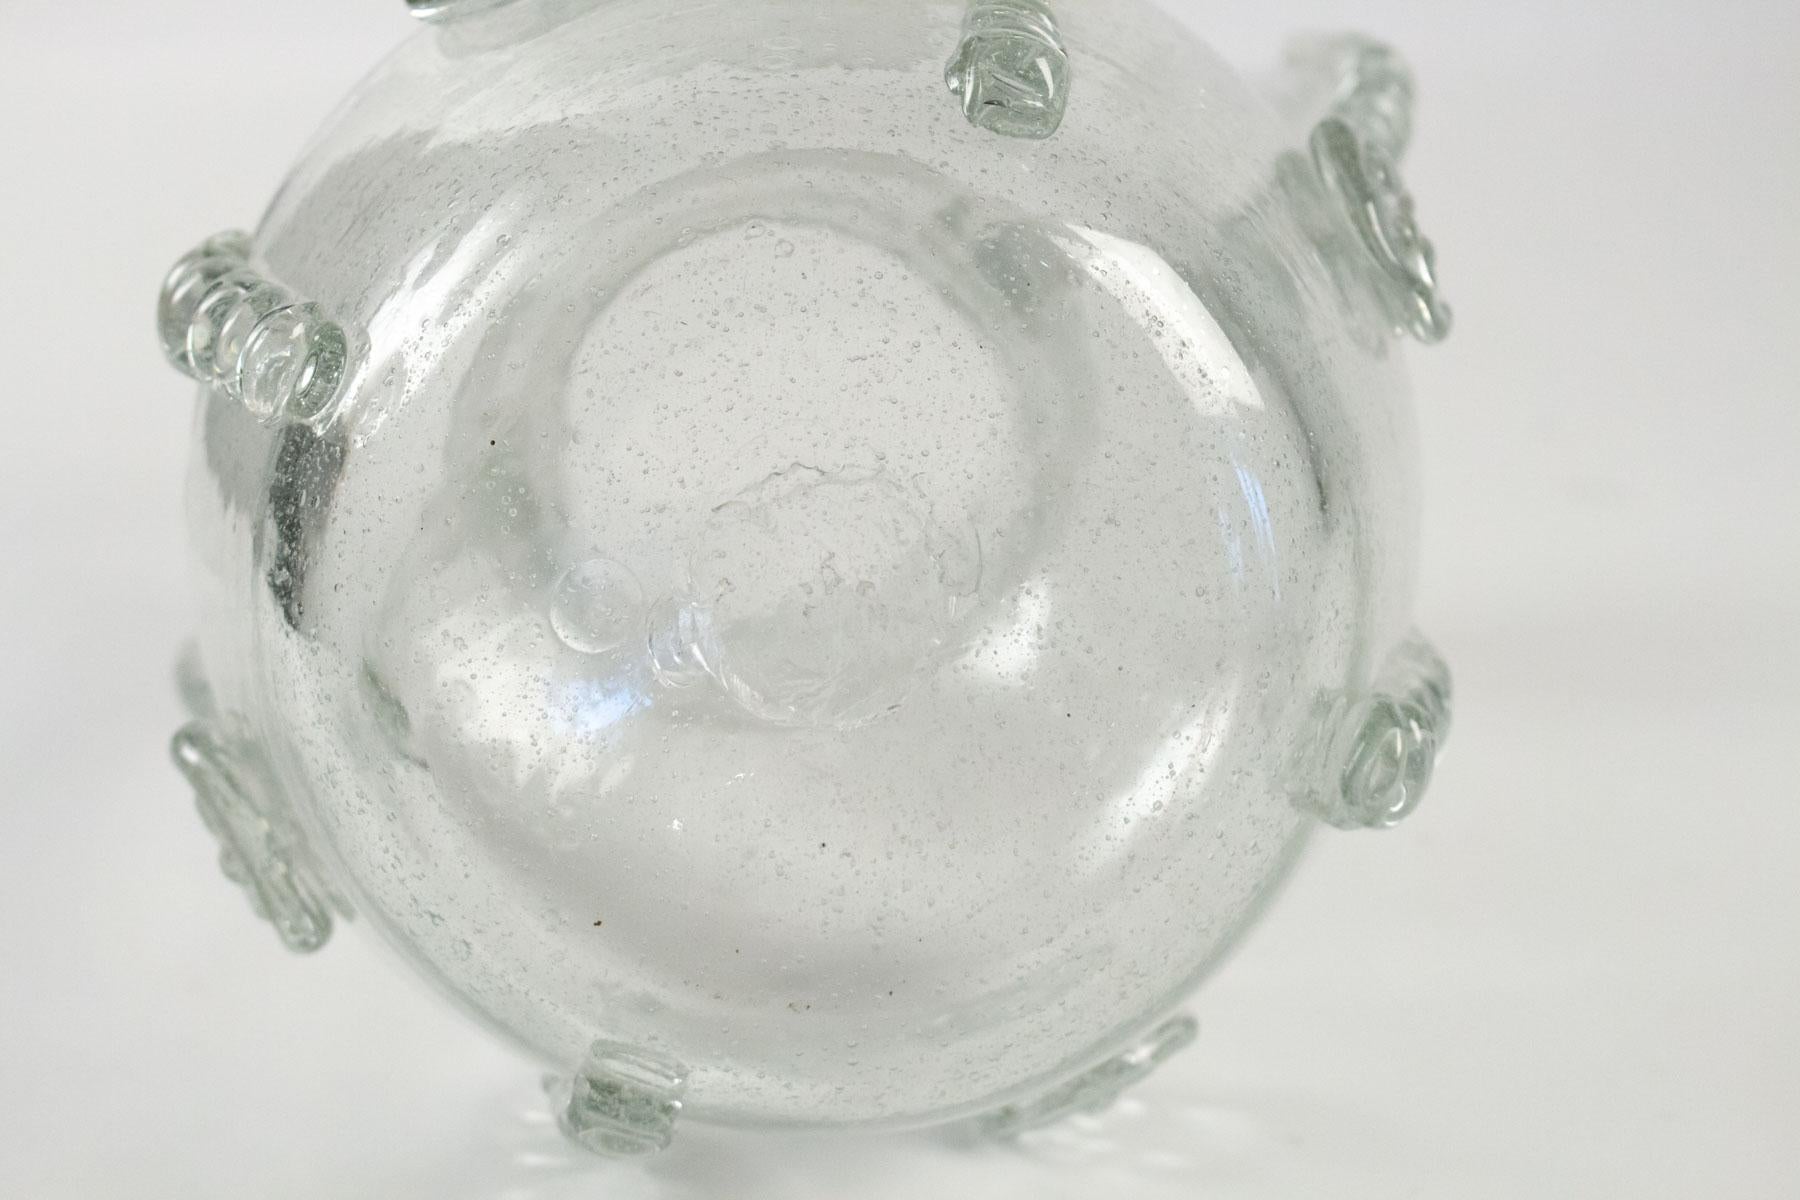 Glass Vase From Normandy, Rouen, France, 19th Century, Old Dishes 1